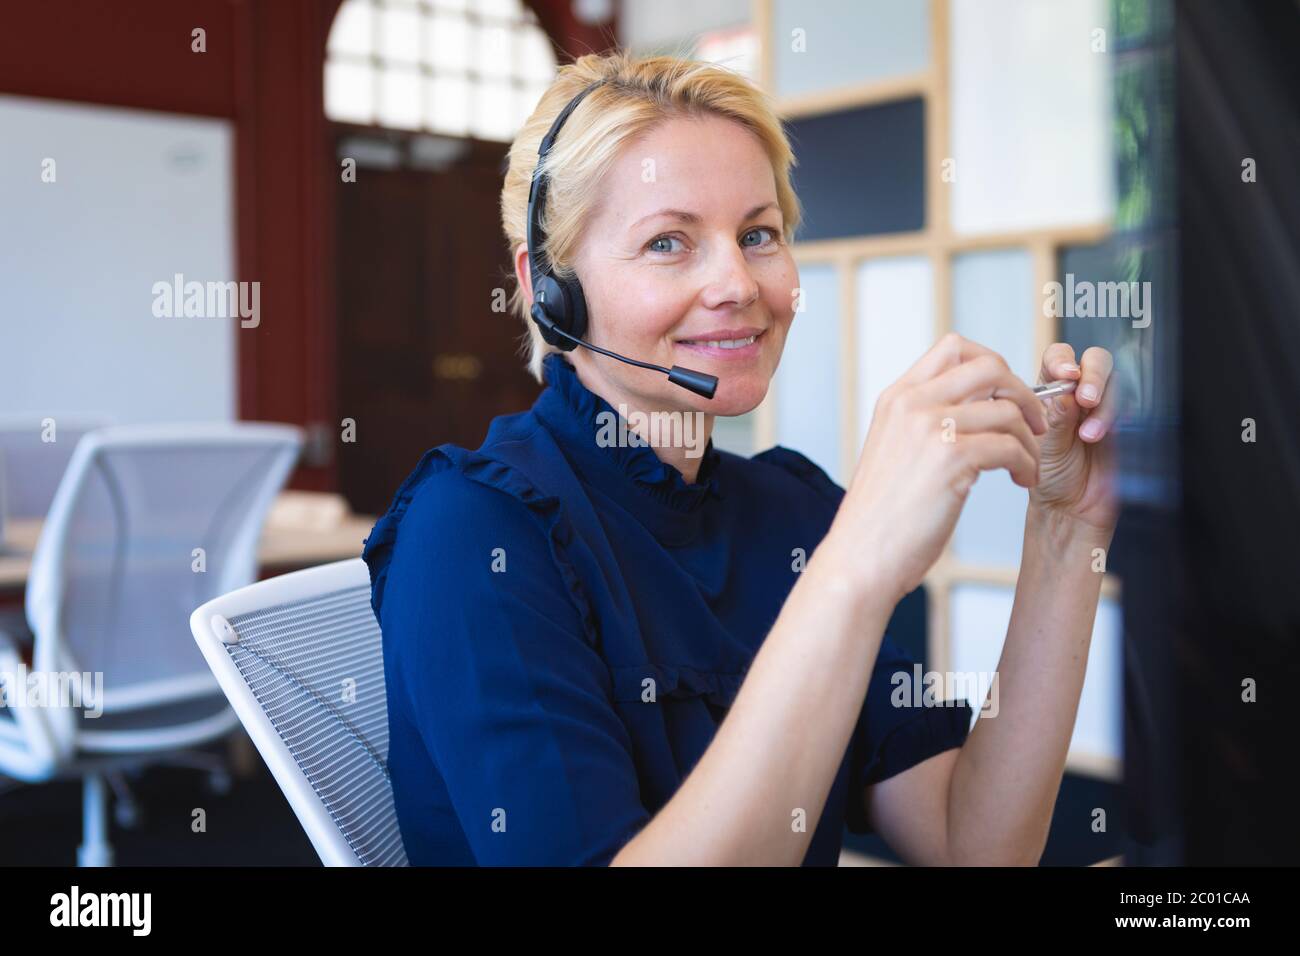 Blonde woman with an earpiece on smiliing and looking at camera Stock Photo